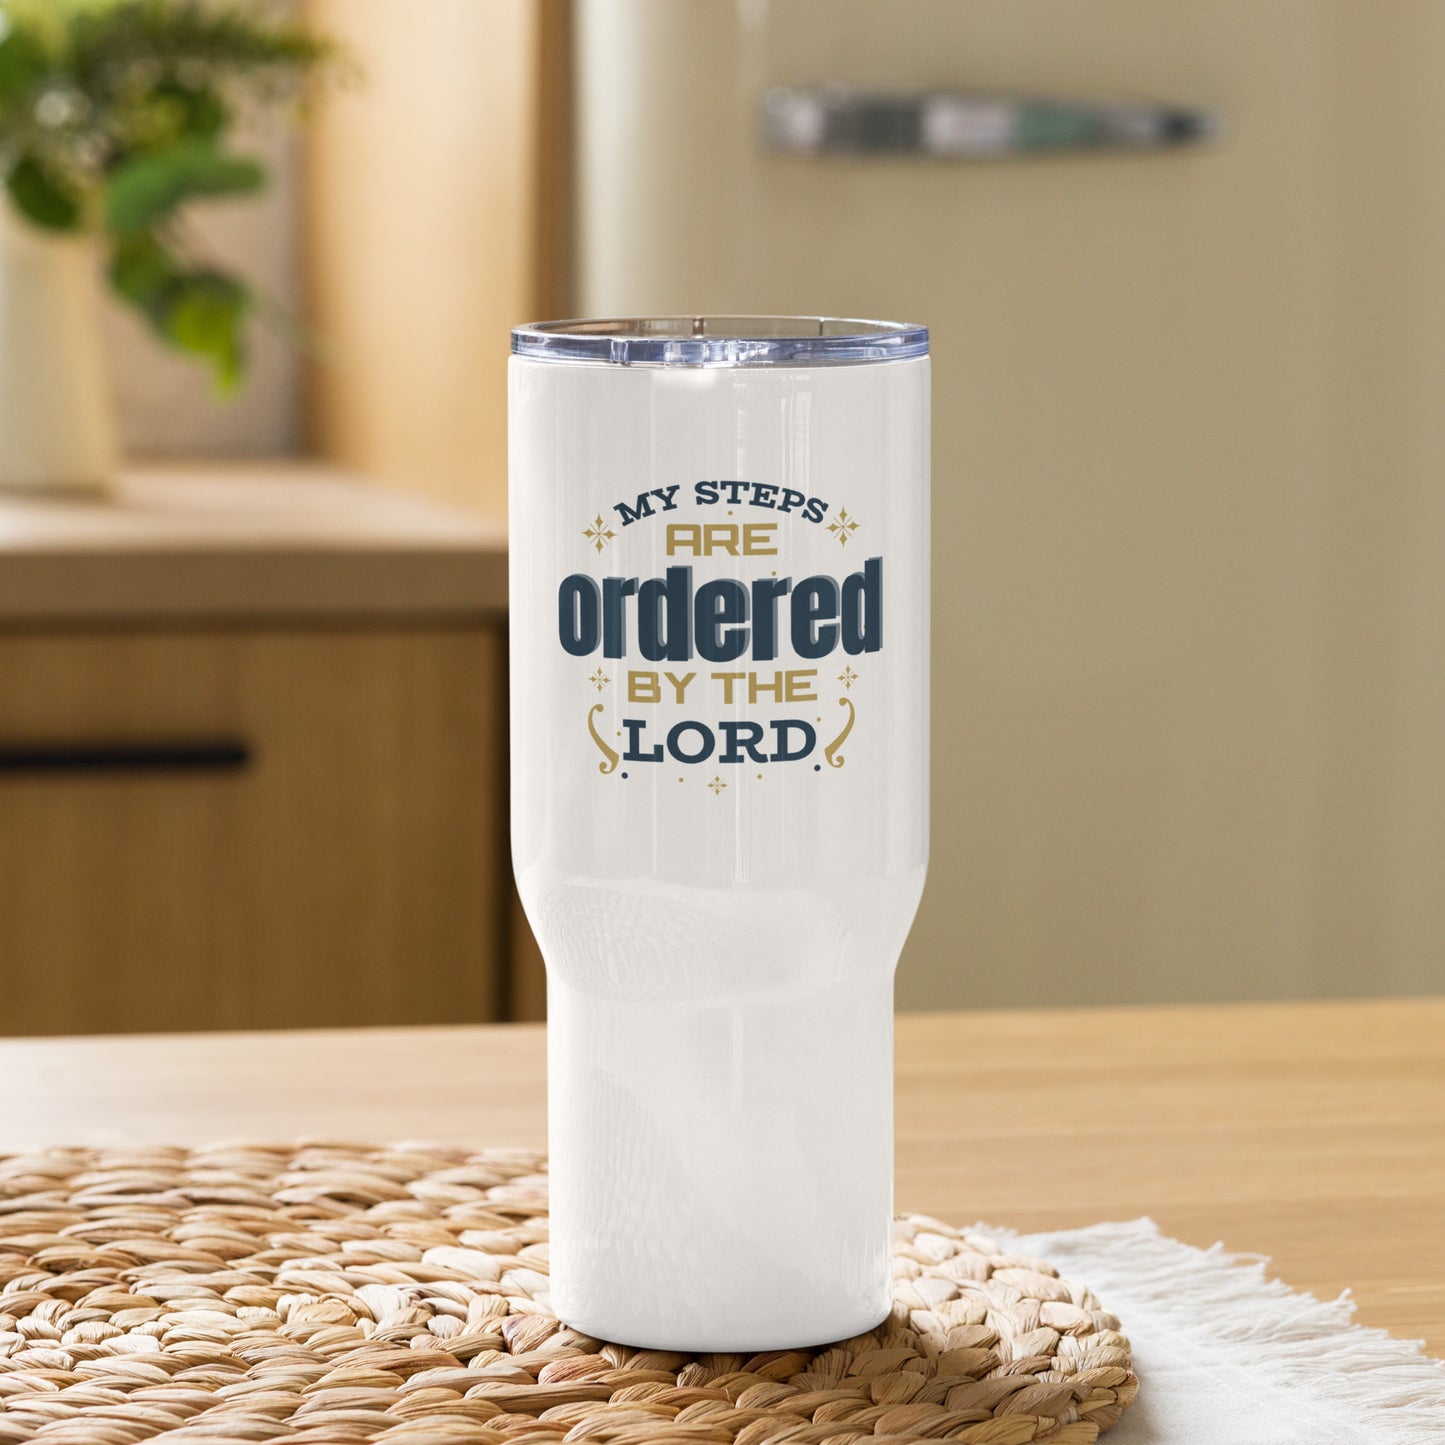 My Steps Are Ordered By The Lord Christian Travel mug with a handle